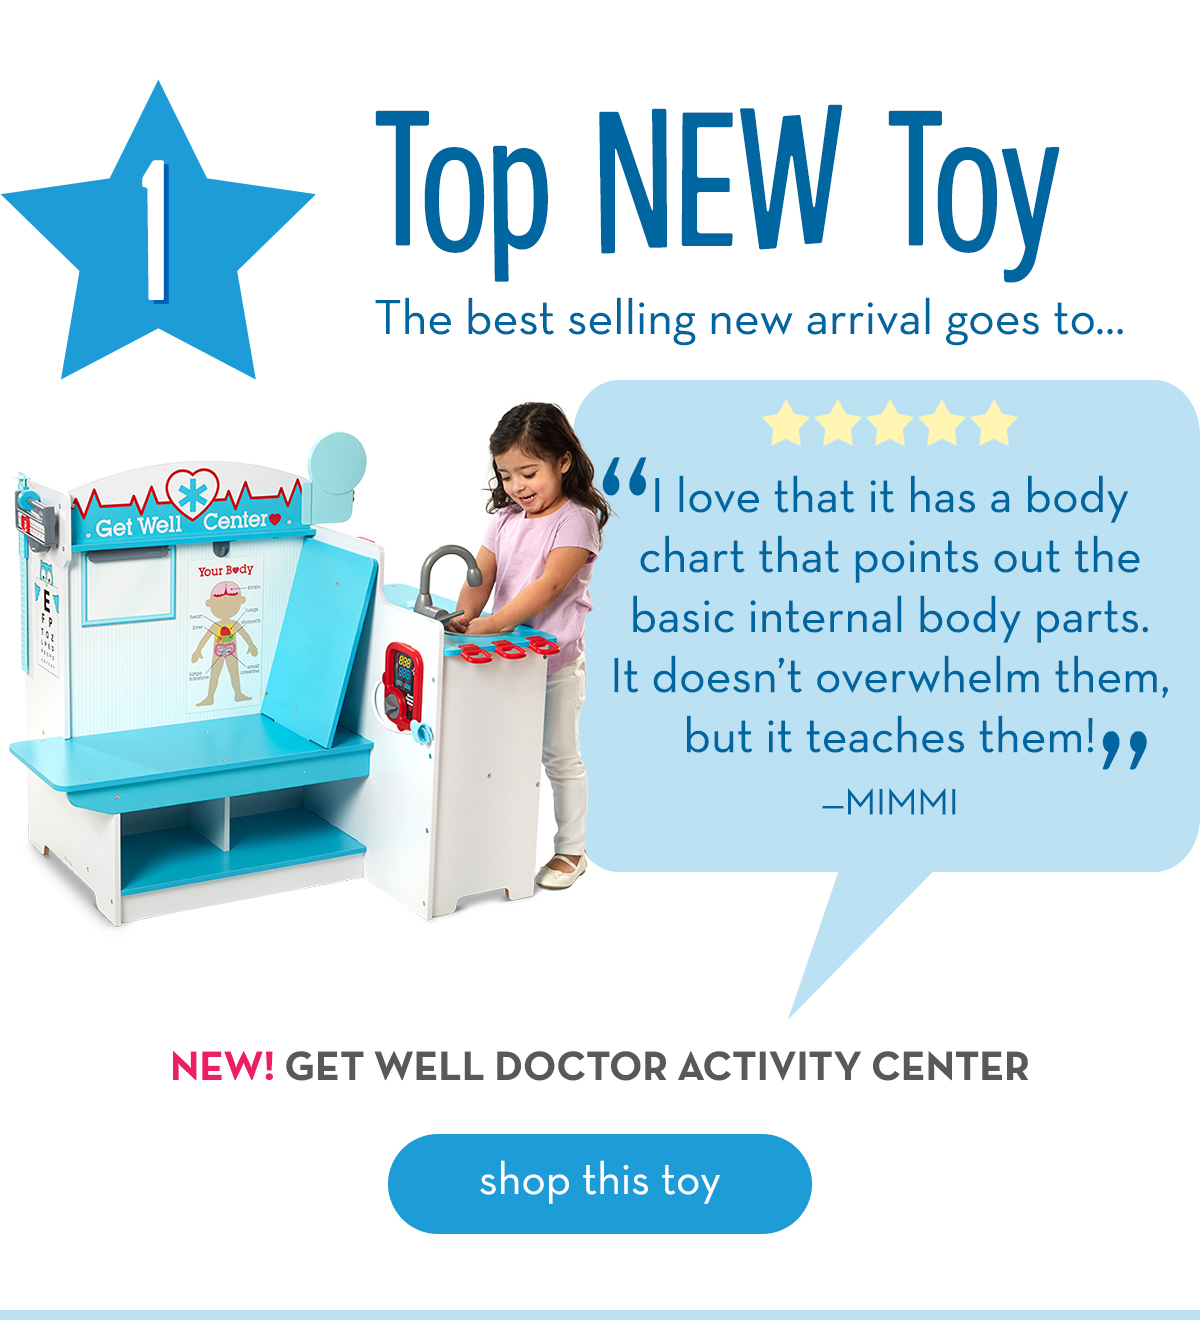 1. Top NEW Toy: The best selling new arrival goes to... Get Well Doctor Activity Center!